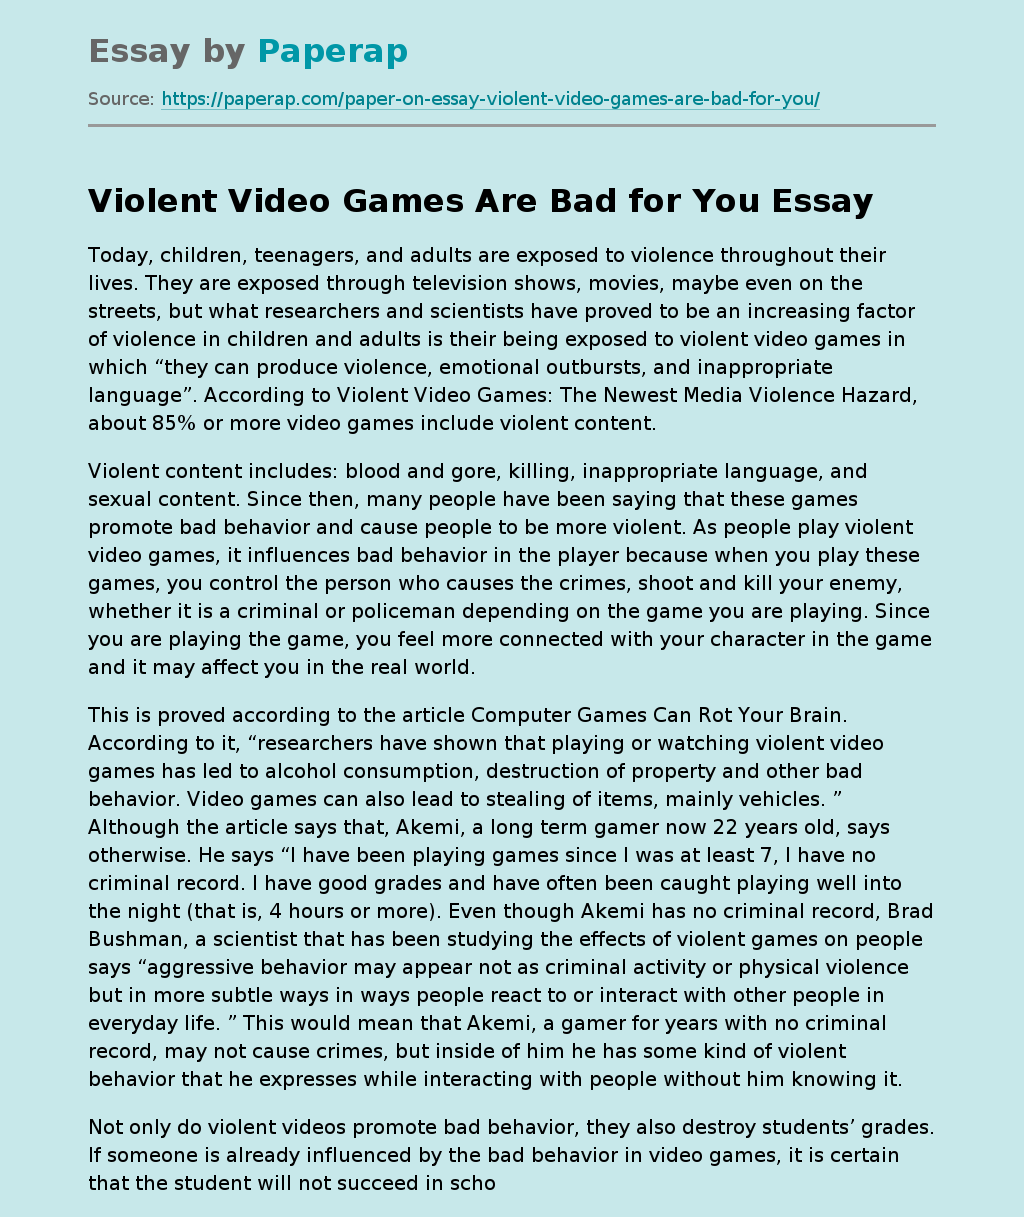 Violent Video Games Are Bad for You